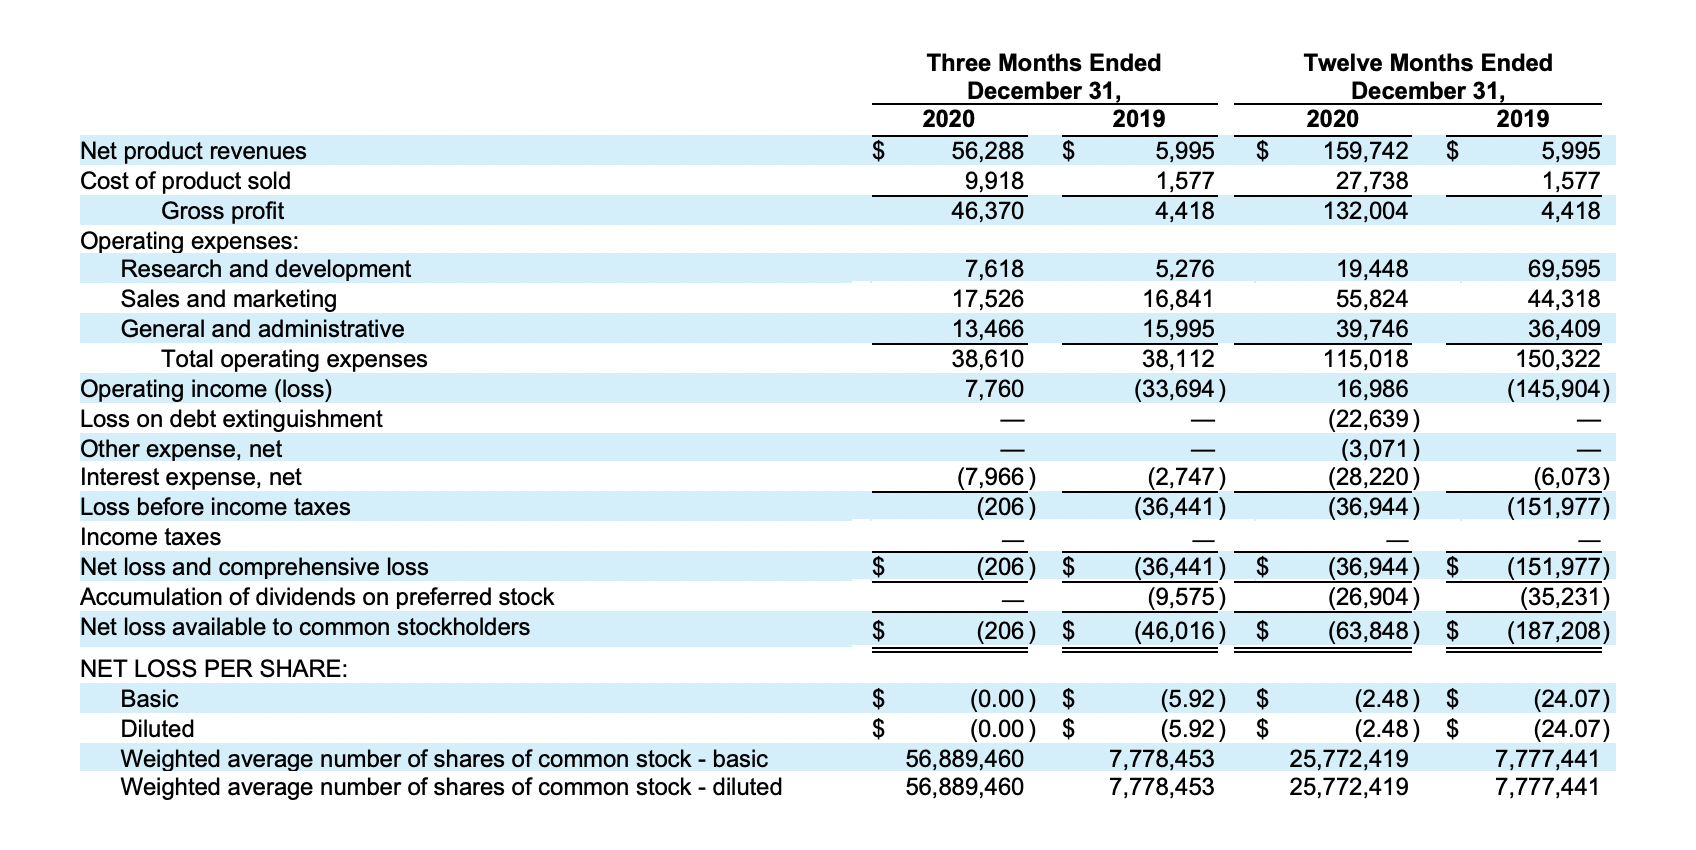 HARMONY BIOSCIENCES HOLDINGS, INC. CONSOLIDATED STATEMENTS OF OPERATIONS AND COMPREHENSIVE LOSS (In thousands except share and per share data) (unaudited)